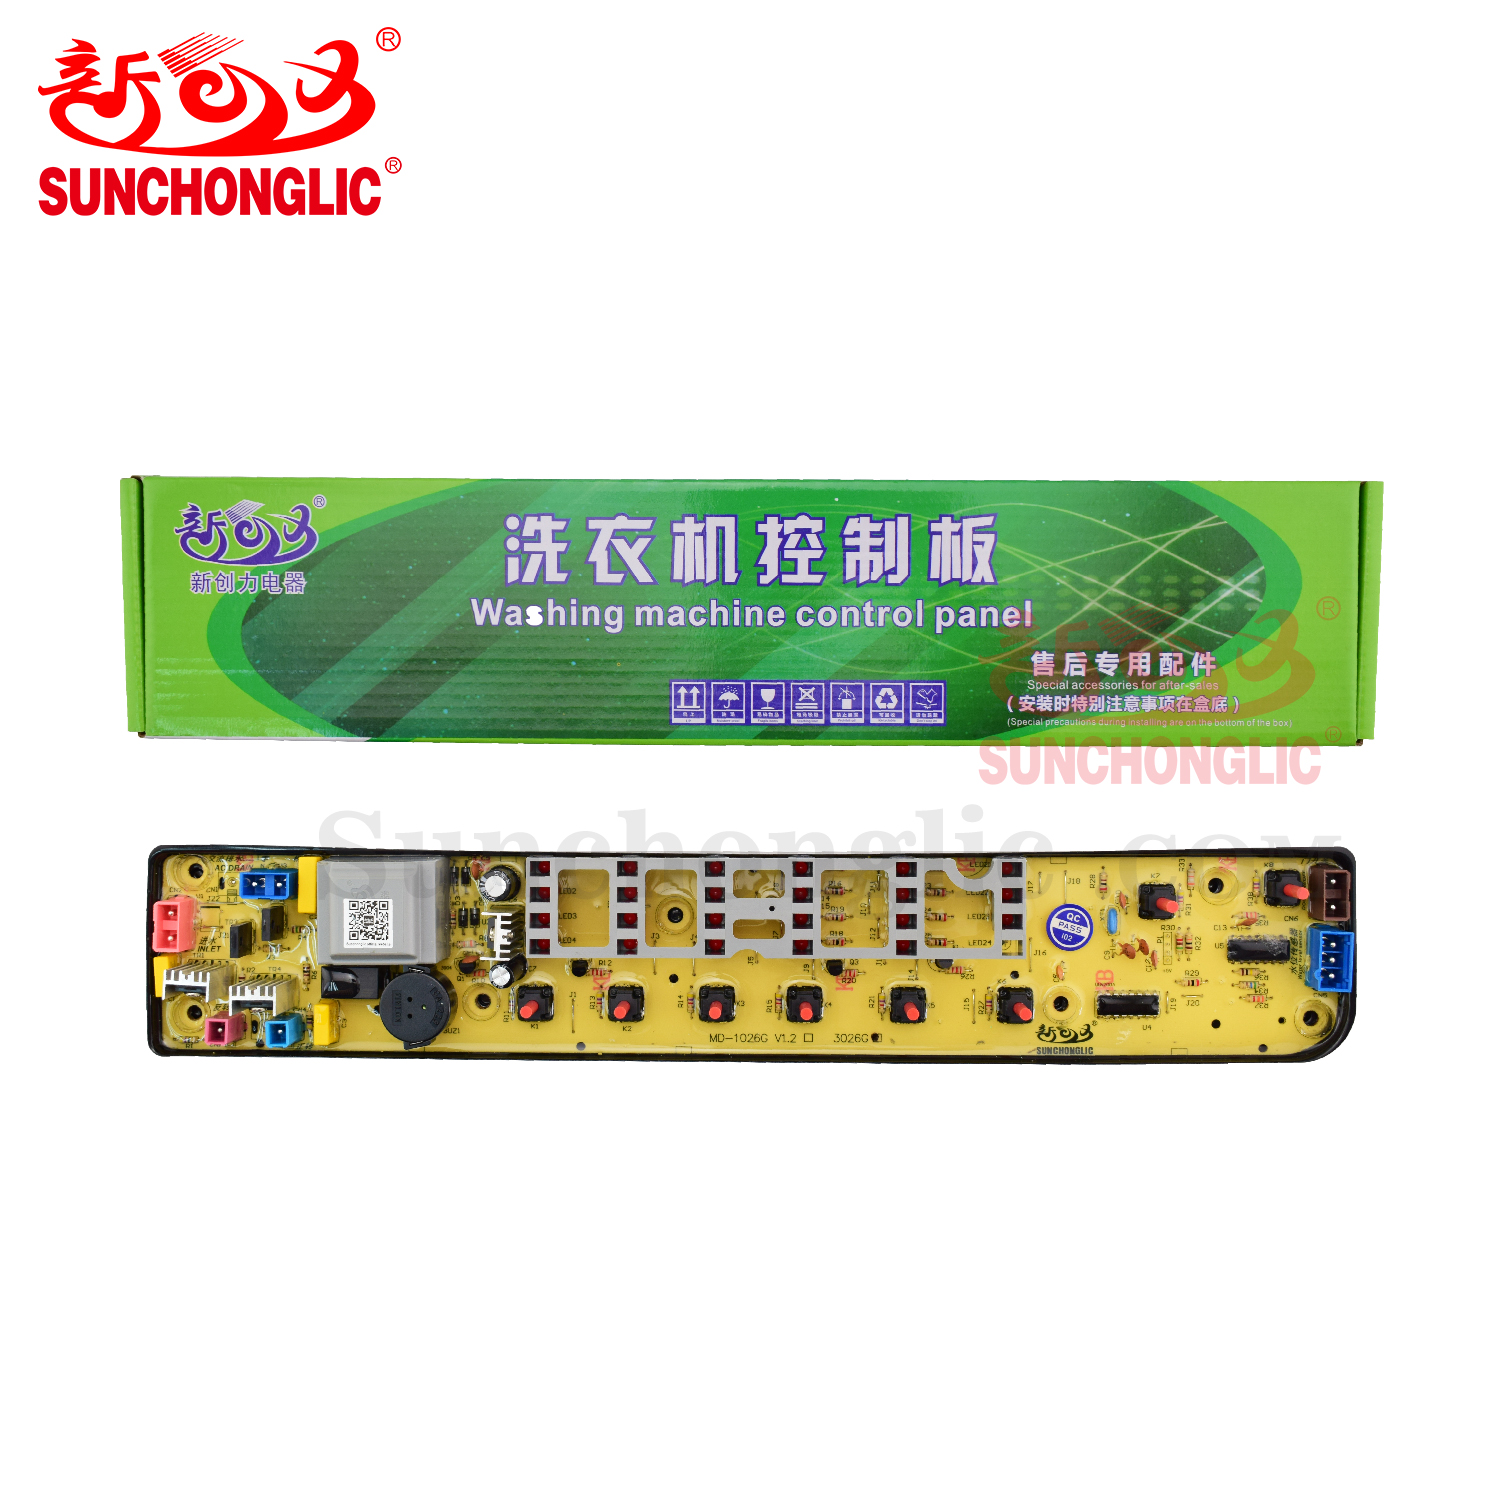 Sunchonglic spare parts PCB board for washing machine